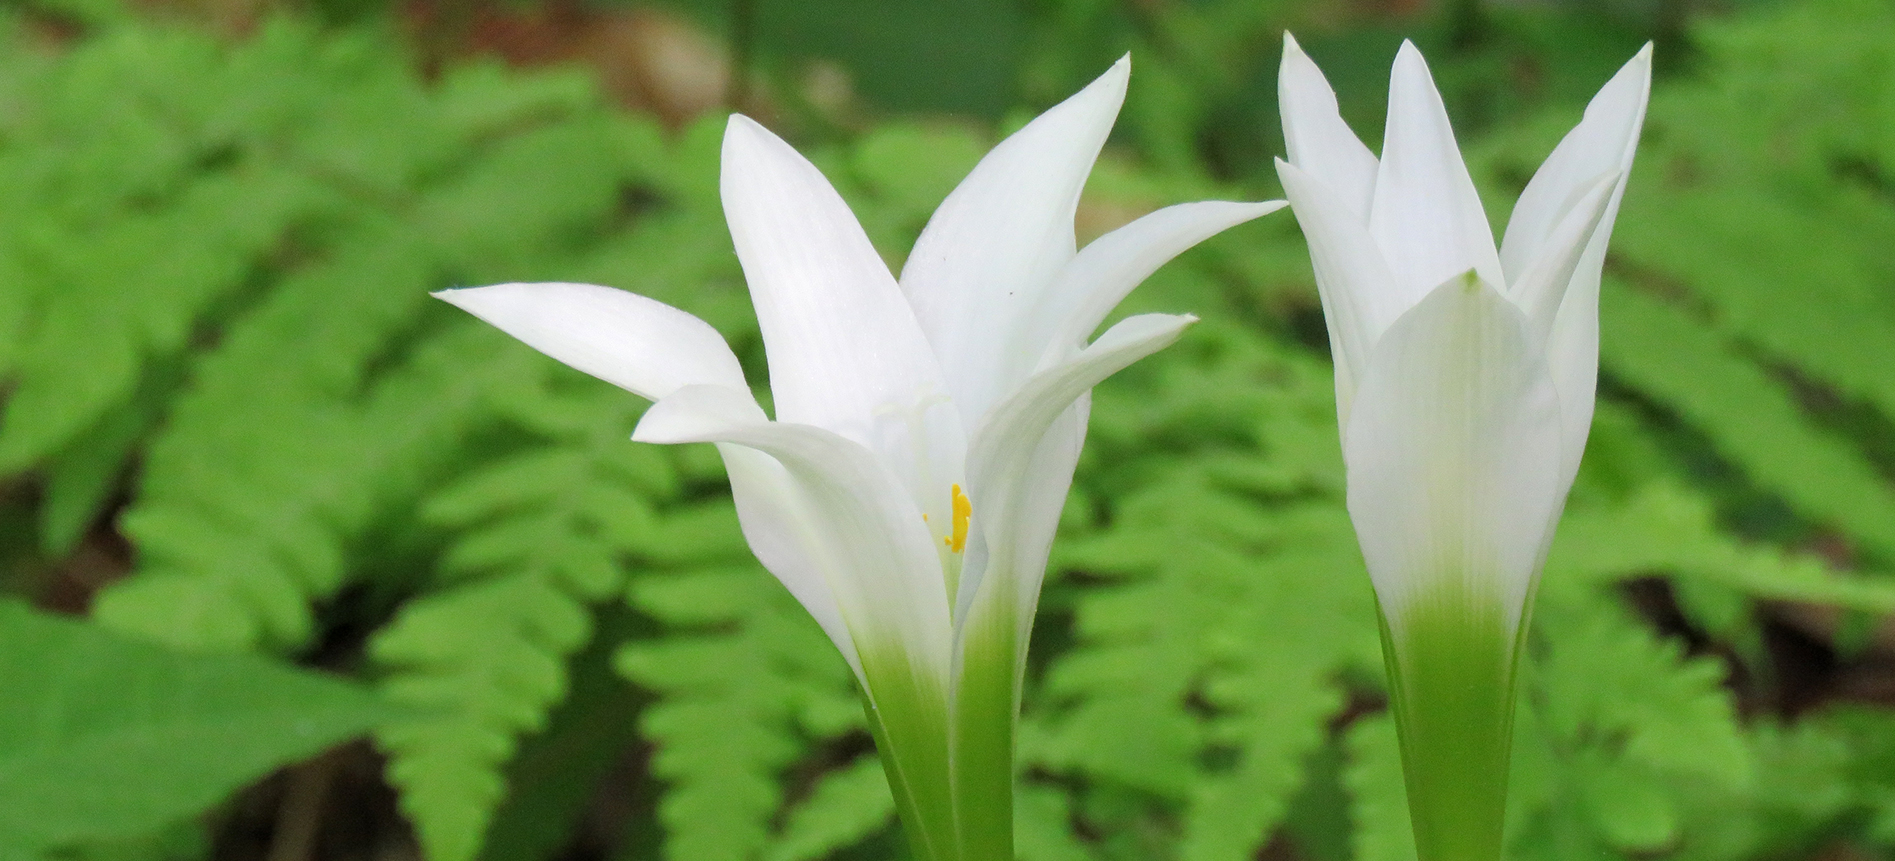 Two white atamasco lilies with ferns in the background.